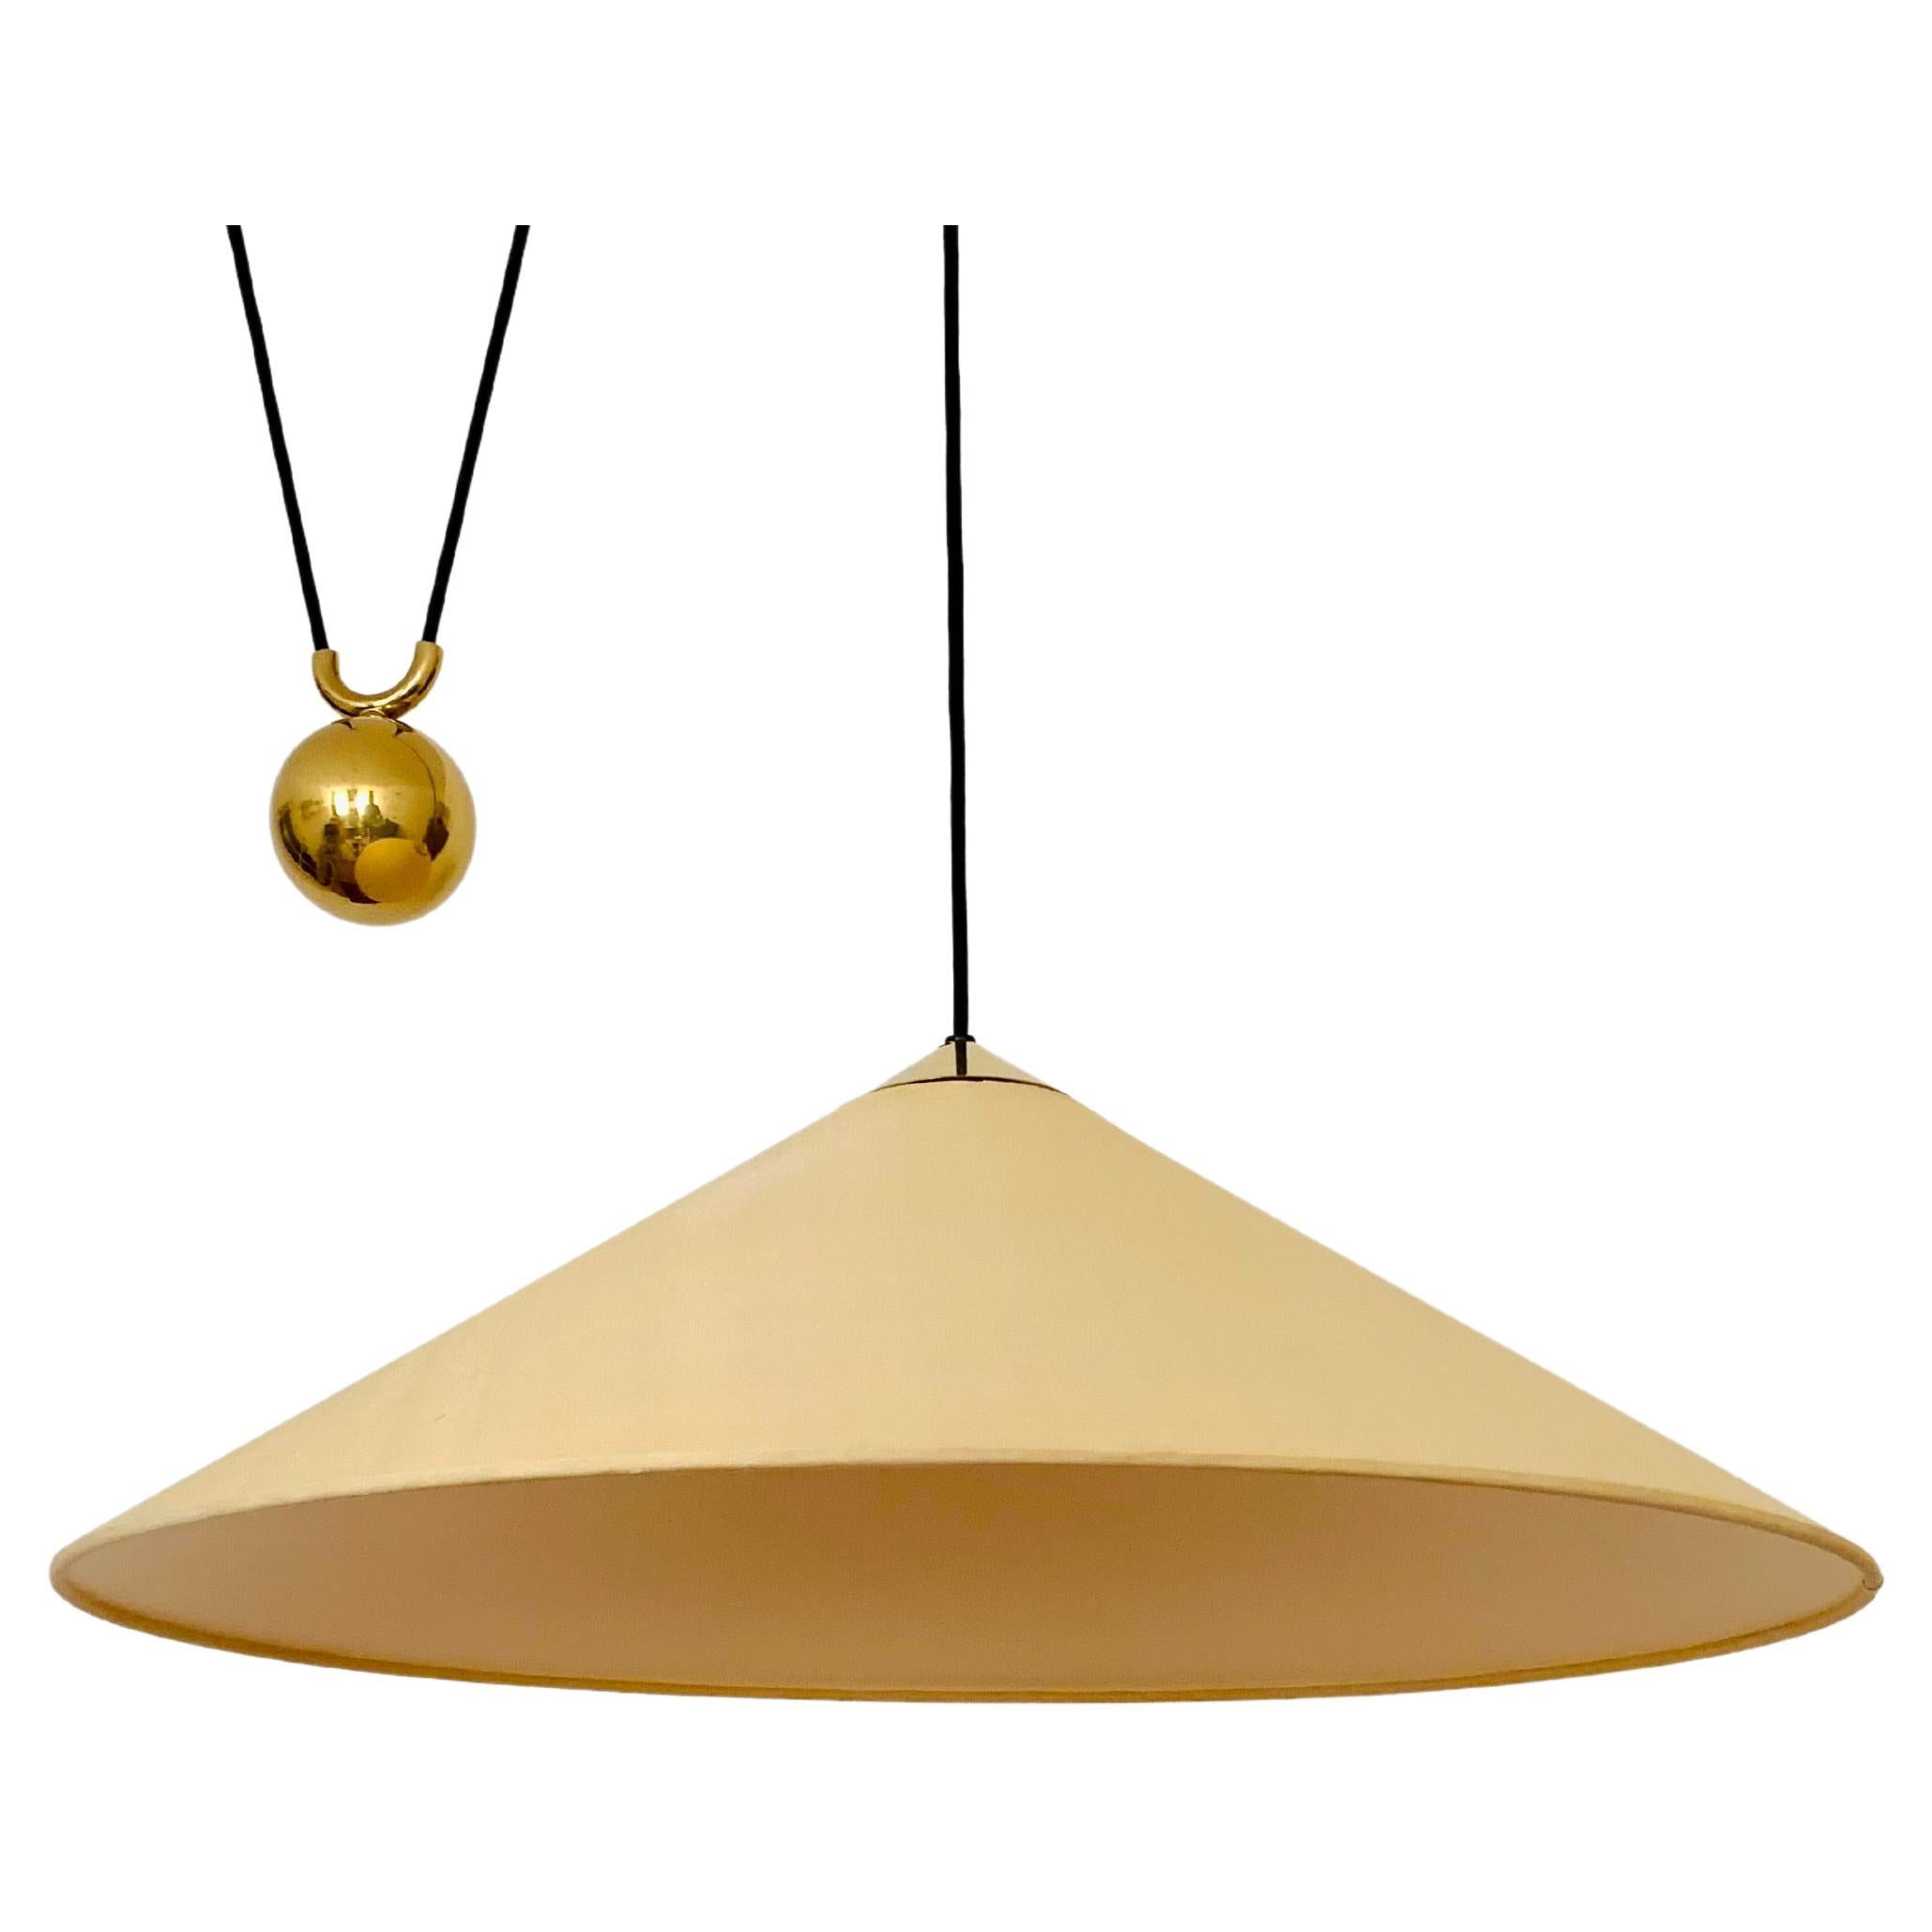 Adjustable Brass Pendant Lamp with Counterweight by Florian Schulz For Sale